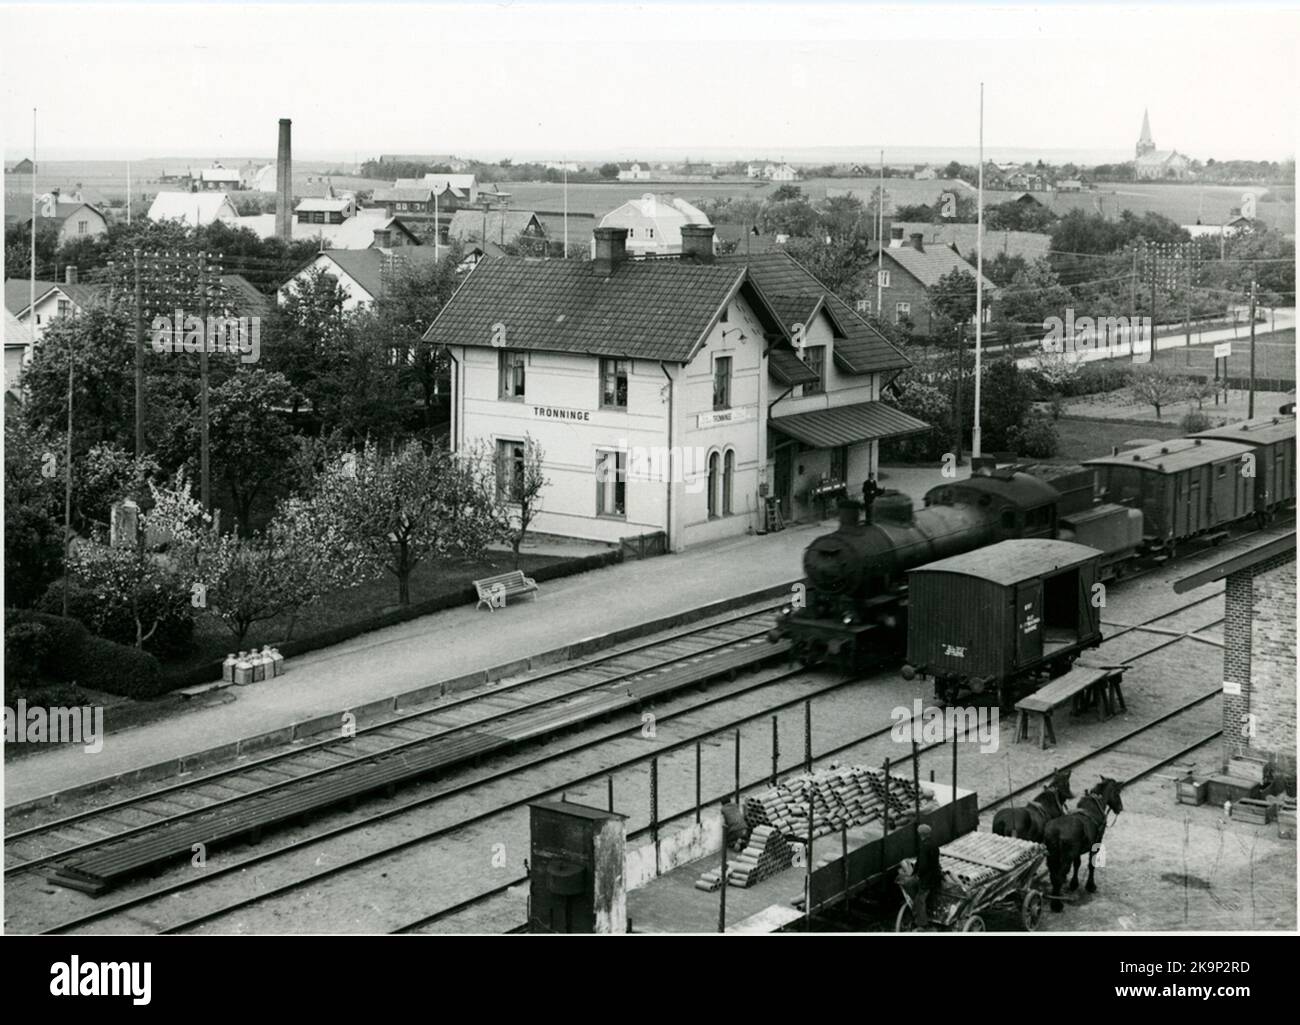 View of Trönninge station community. Originally Skåne-Halland Railway, SHJ.Tåget, Snälltåg no. 43 consists of the State Railways, SJ B-LOK, Double trailers F1.The carriage next to the steam locomotive is a so-called freight move car, former GÄ 317. These wagons were used internally at the station.Tt.tt Stock Photo